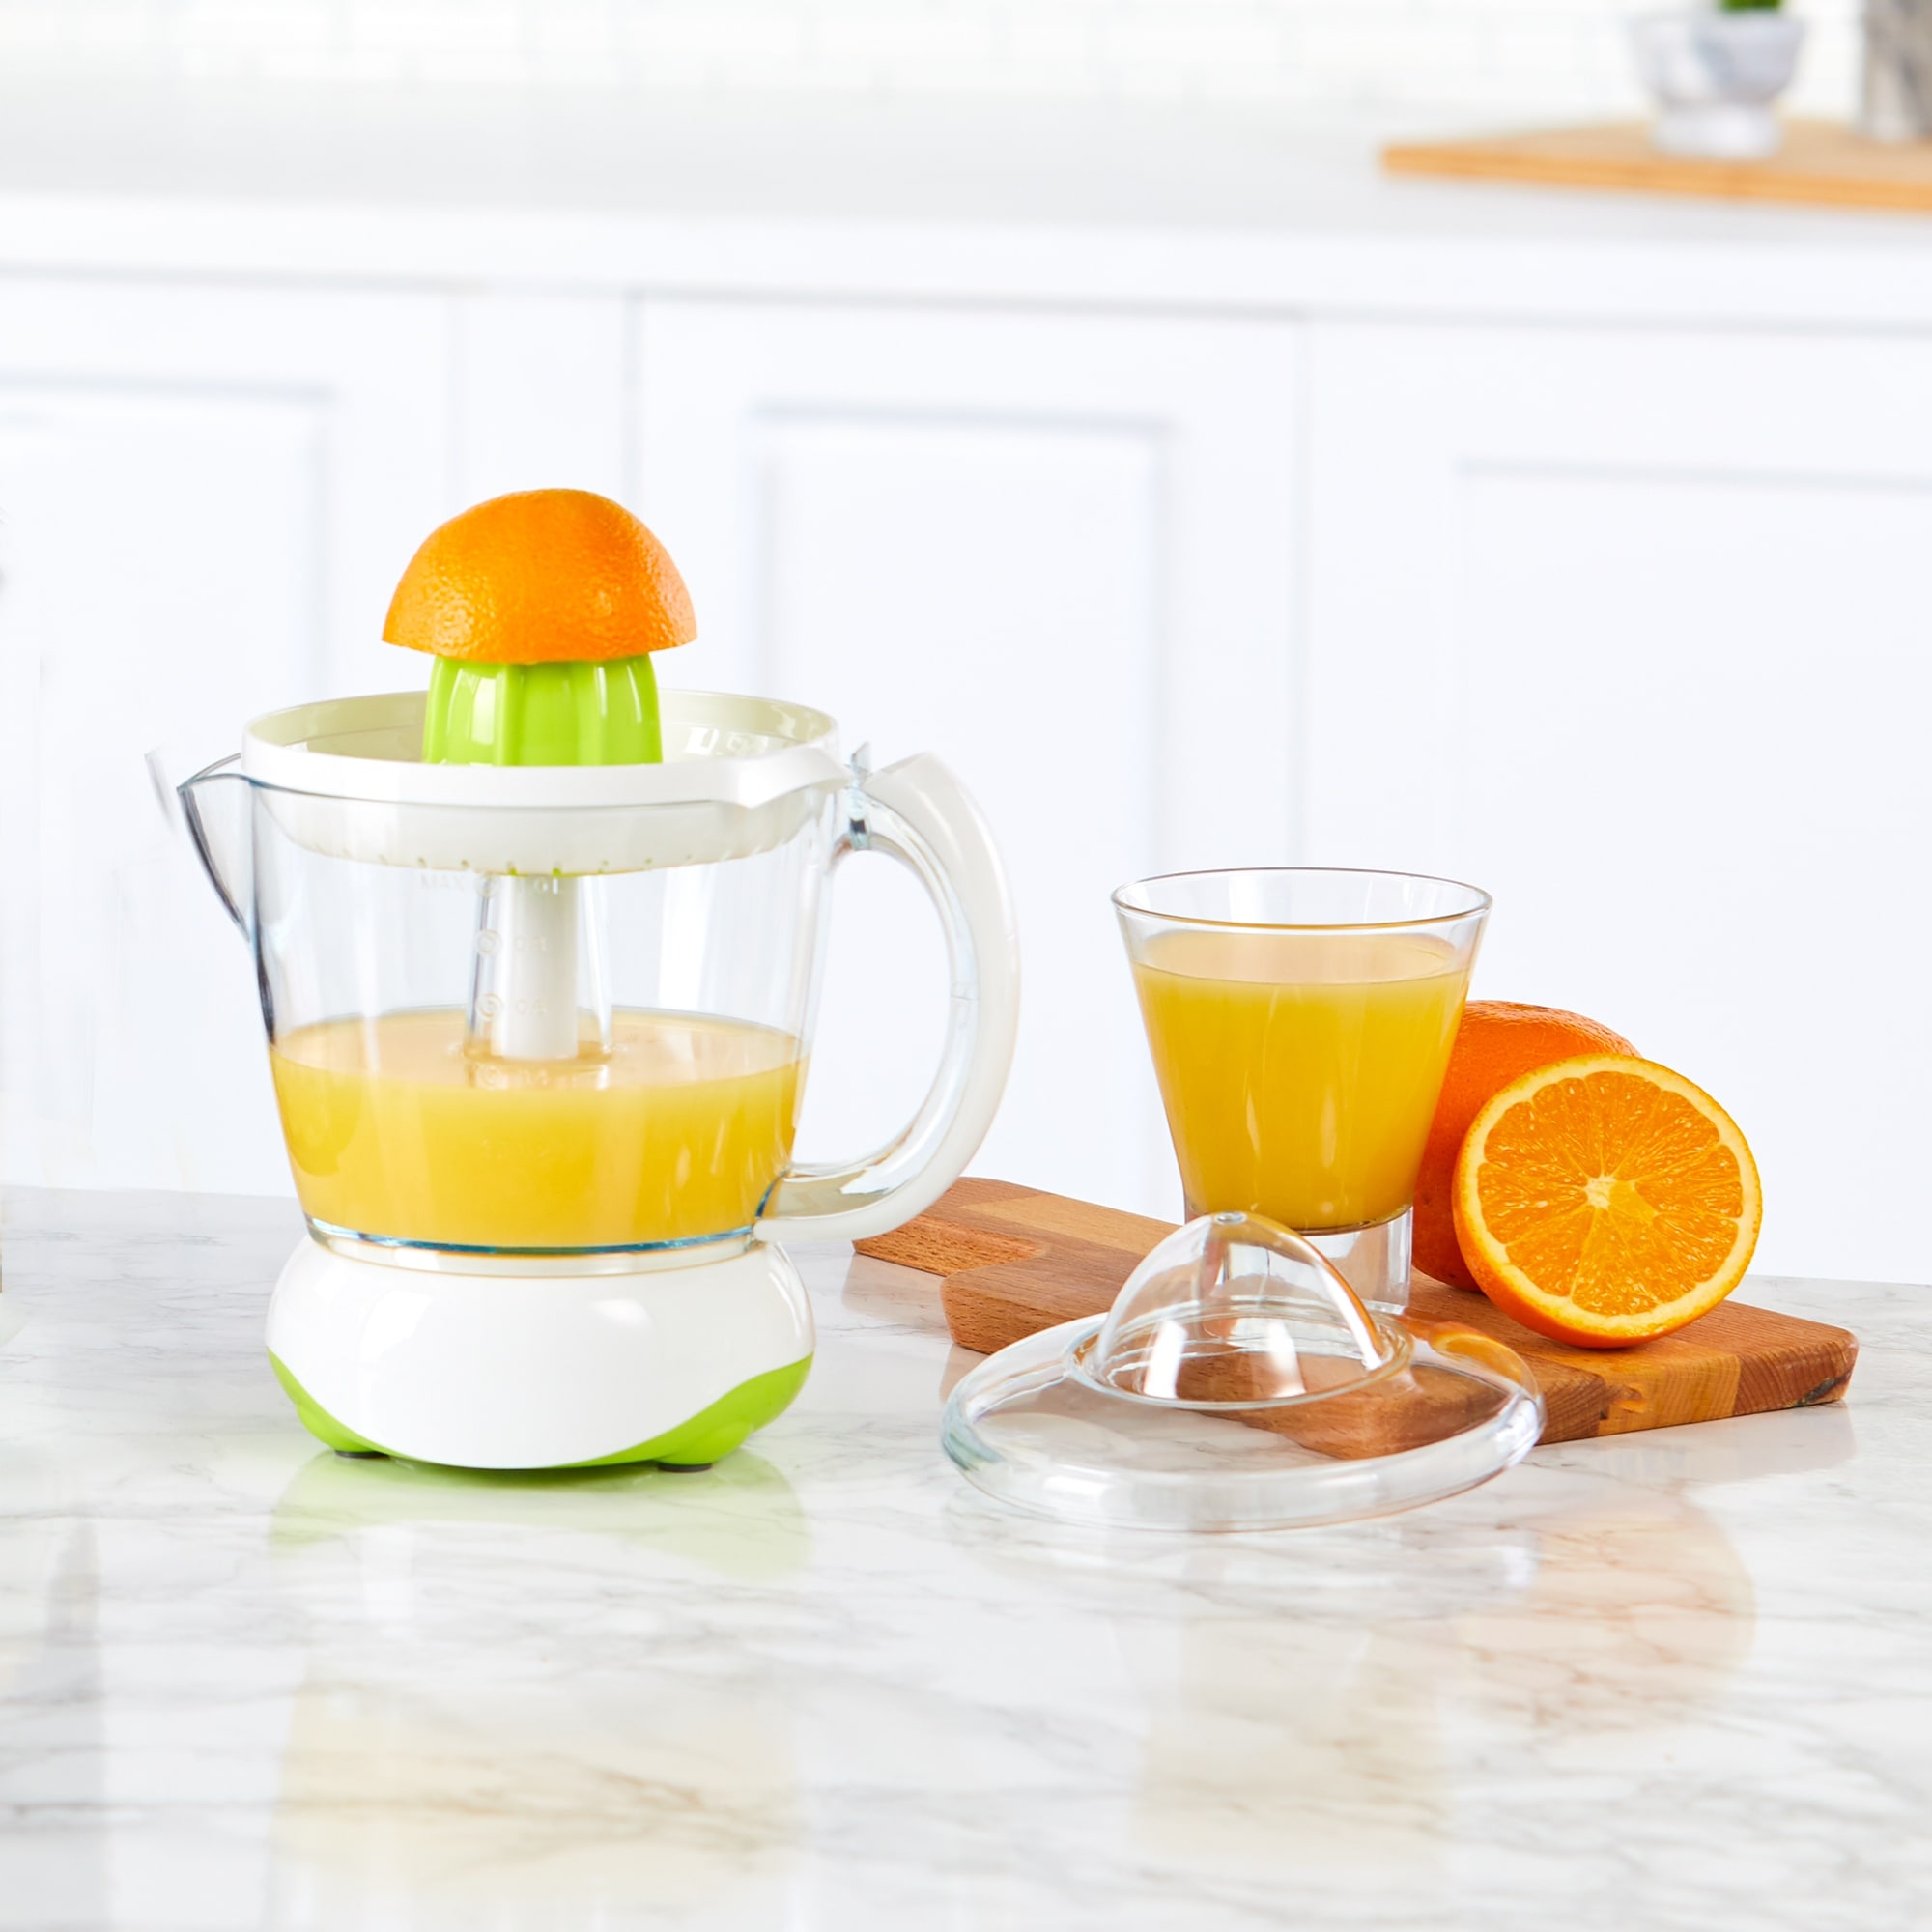 Cheap Juicers, Buy Quality Home Appliances Directly from China  Suppliers:700ml Electric Citrus Orange Juicer Squeezer Lemo…